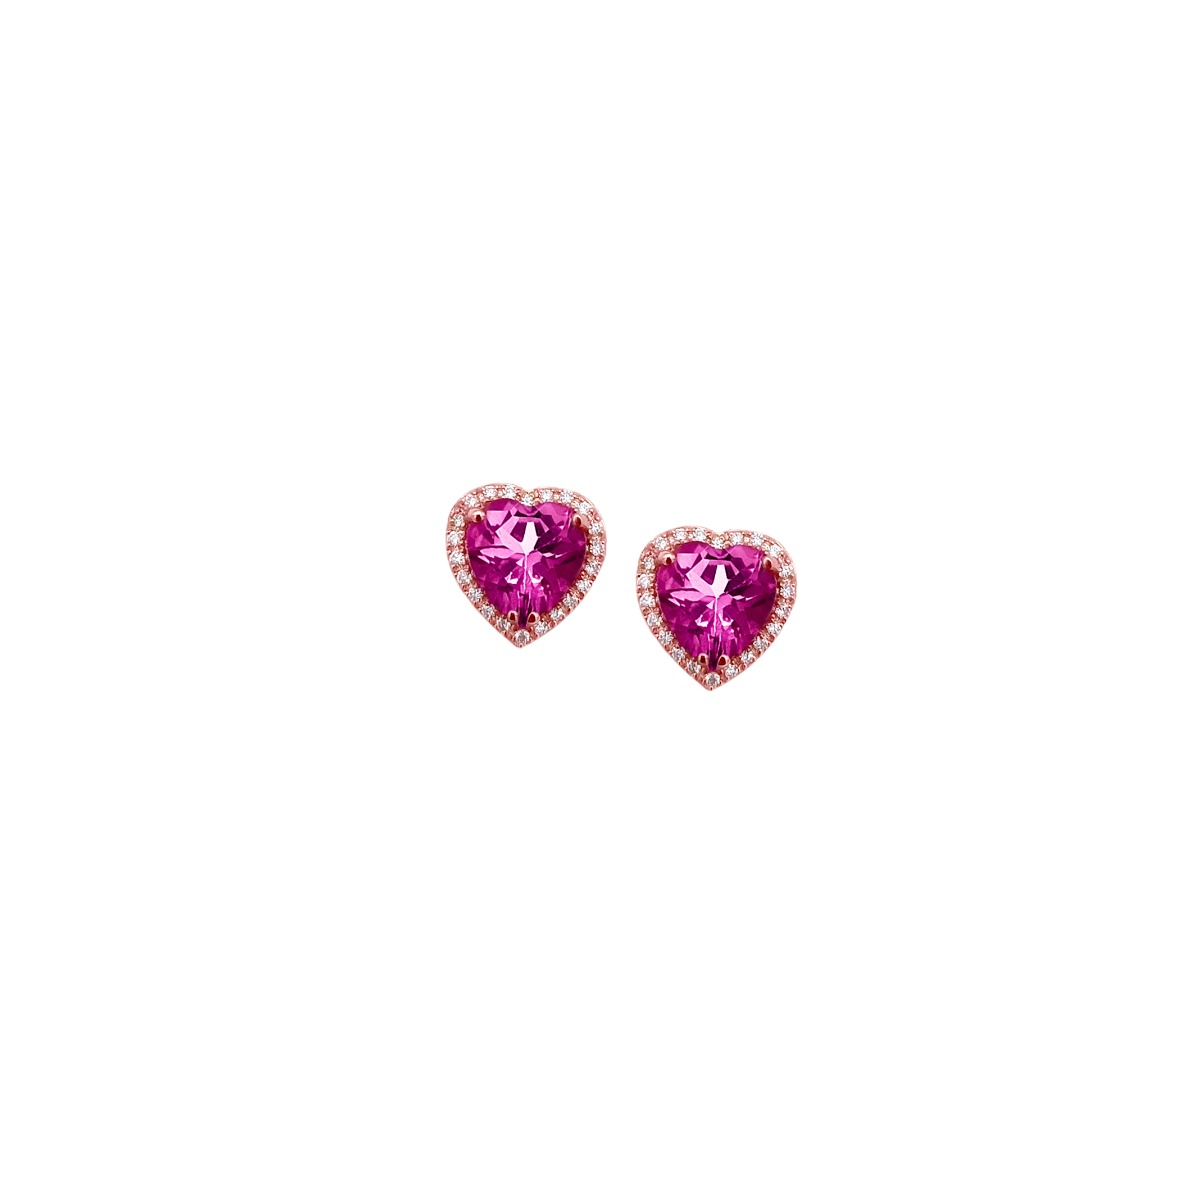 Earrings In Rose Gold And Diamonds With Heart-Shaped Pink Topaz